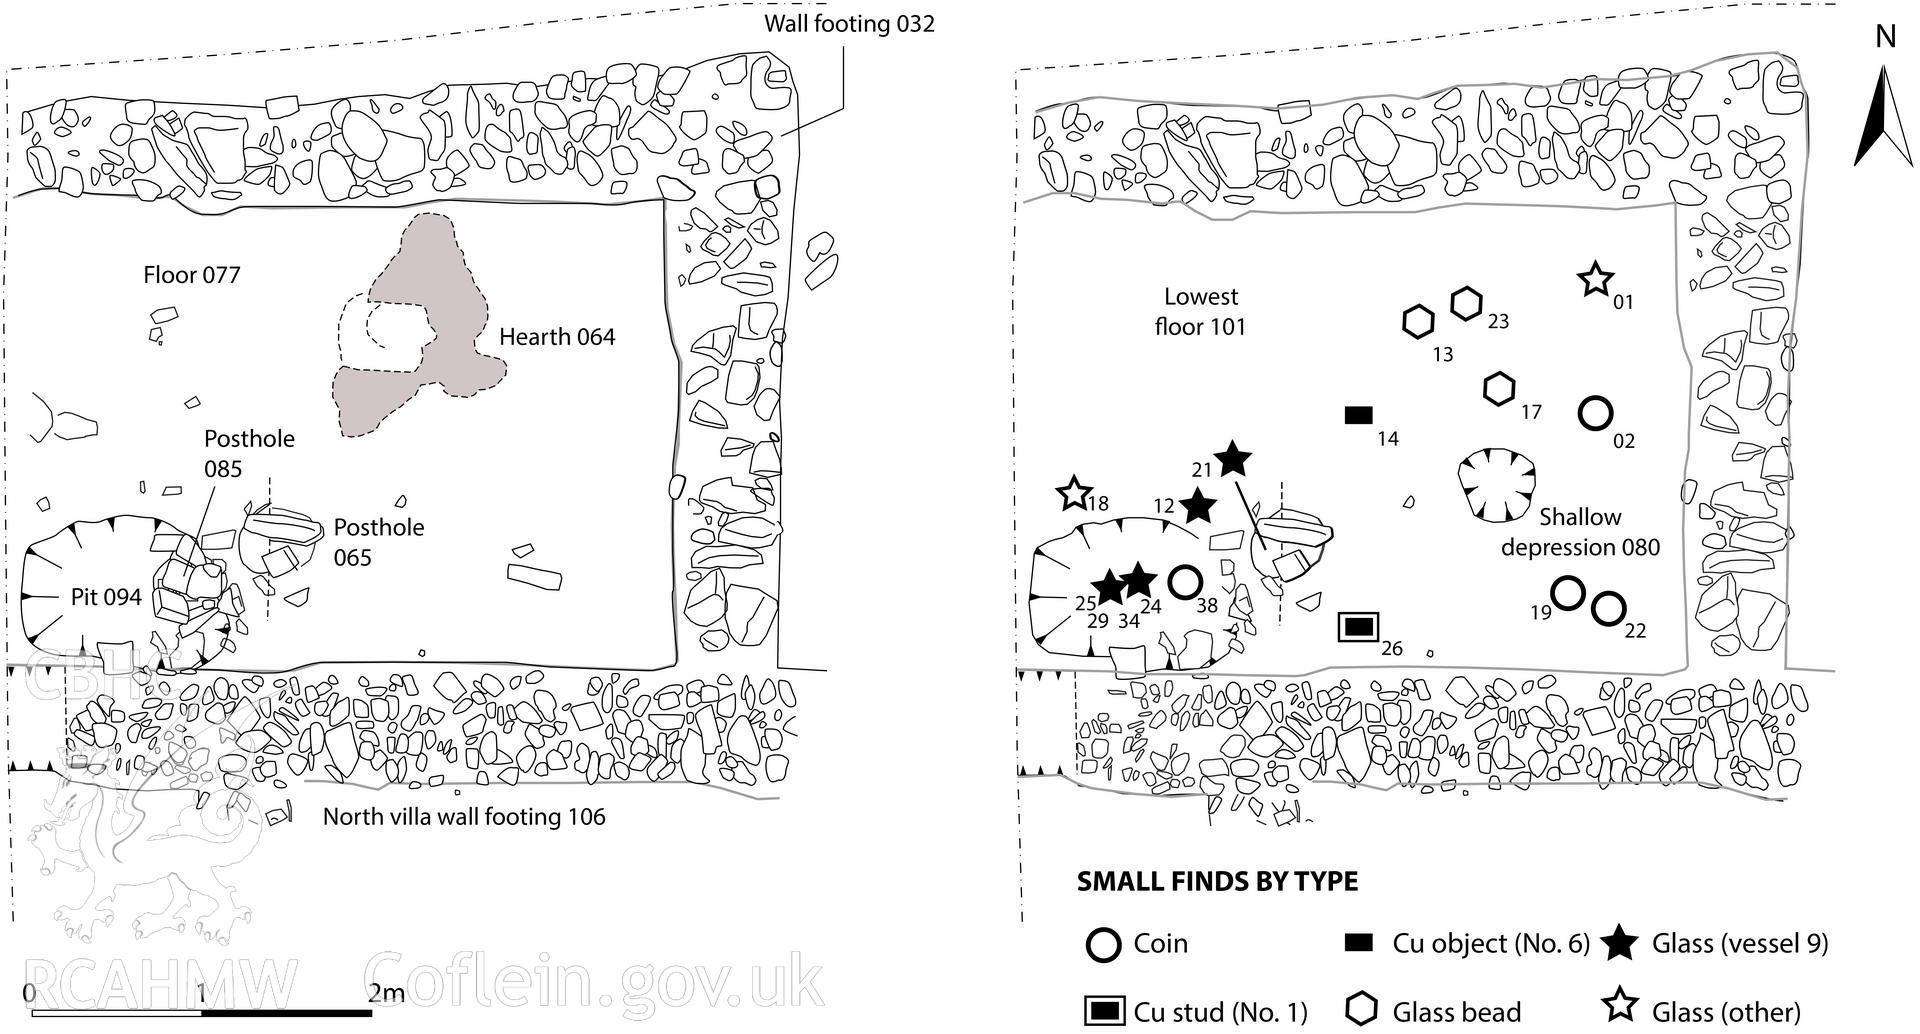 Arch Camb 167 (2018) 143-219. "The Romano-British villa at Abermagwr, Ceredigion: excavations 2010-2015" by Davies and Driver. Web-friendly .tif version of Fig 12. Plans of room 6 as excavated.